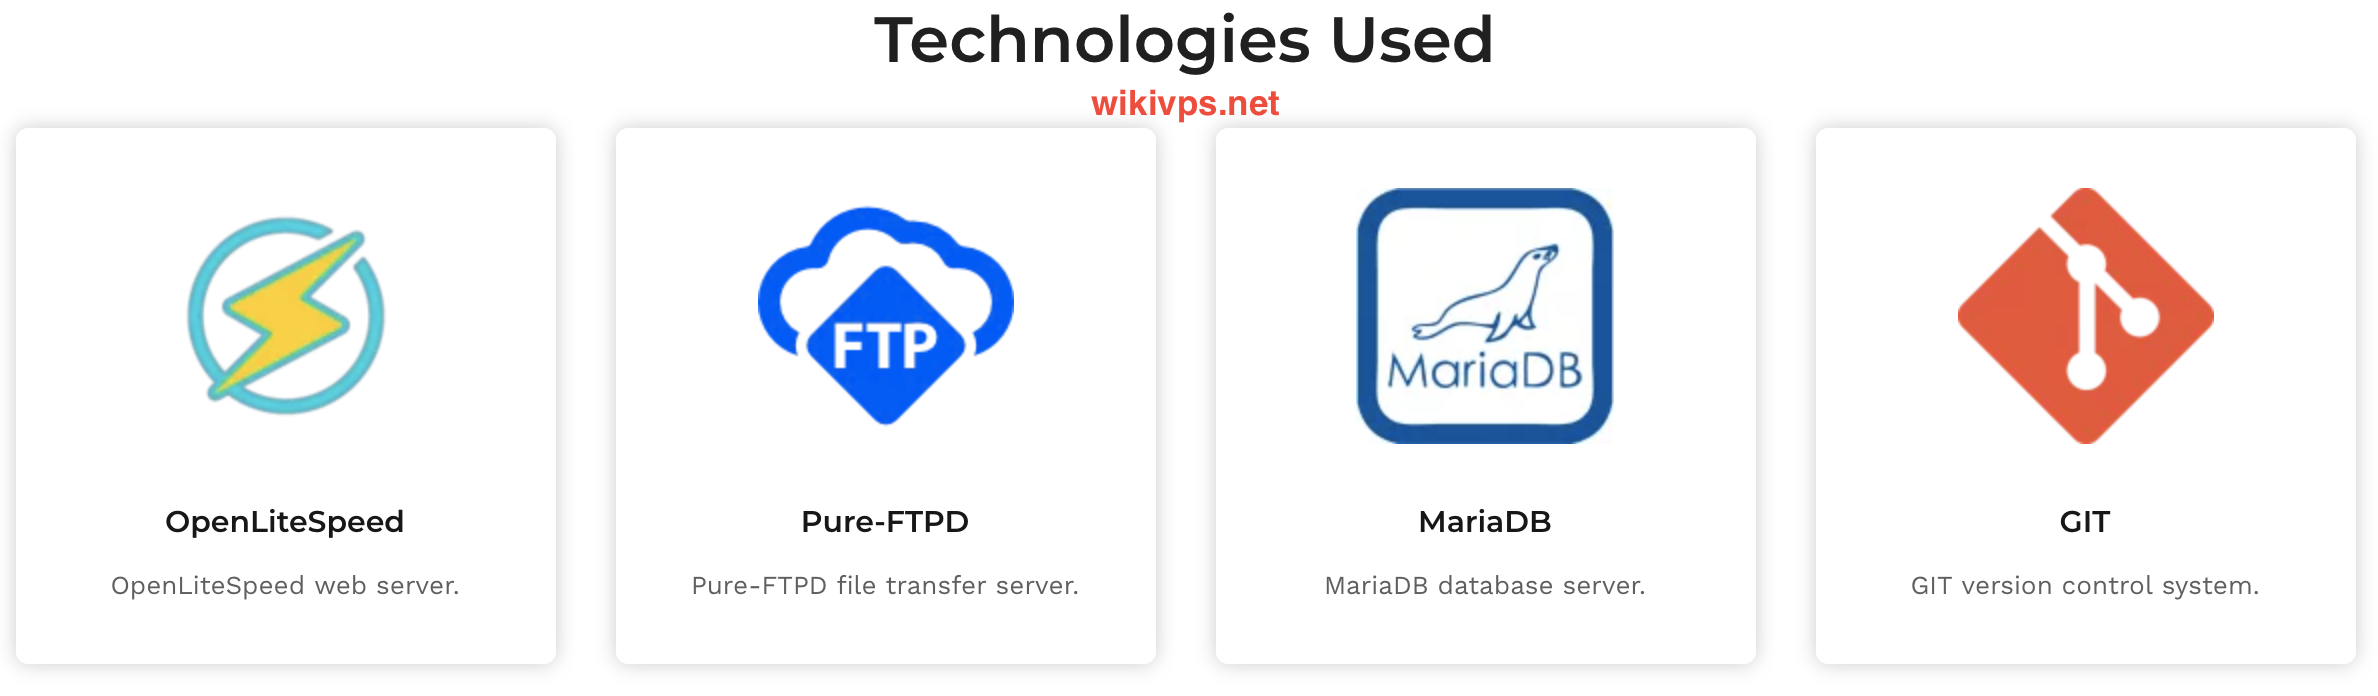 wikivps-Technologies Used